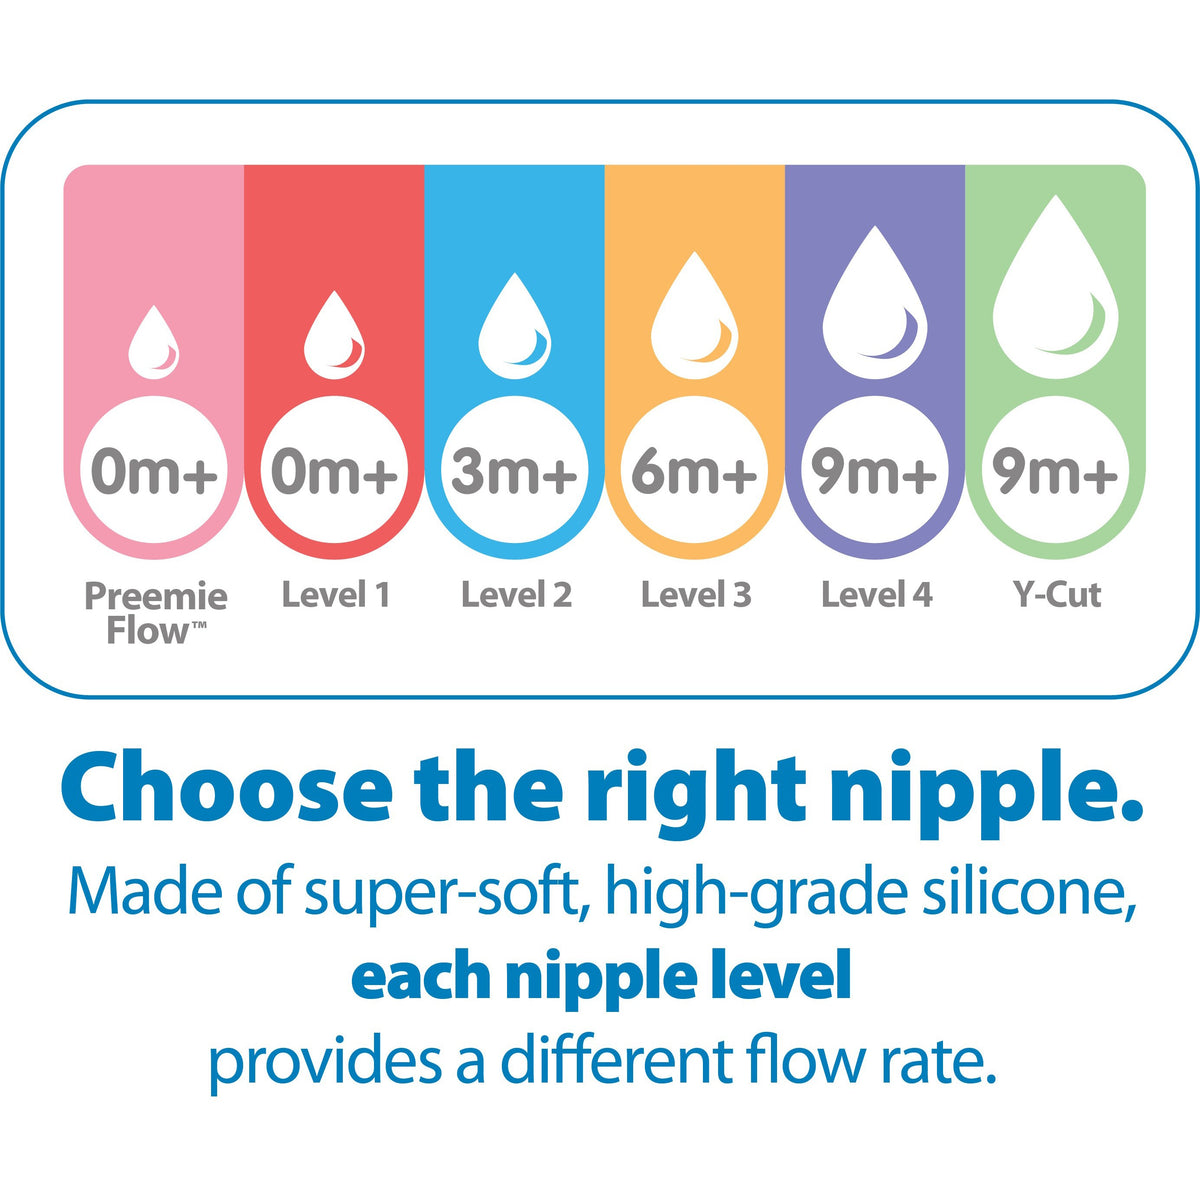 dr-browns-options-breast-like-silicone-nipples-2s-level-2-germany-3m- (3)